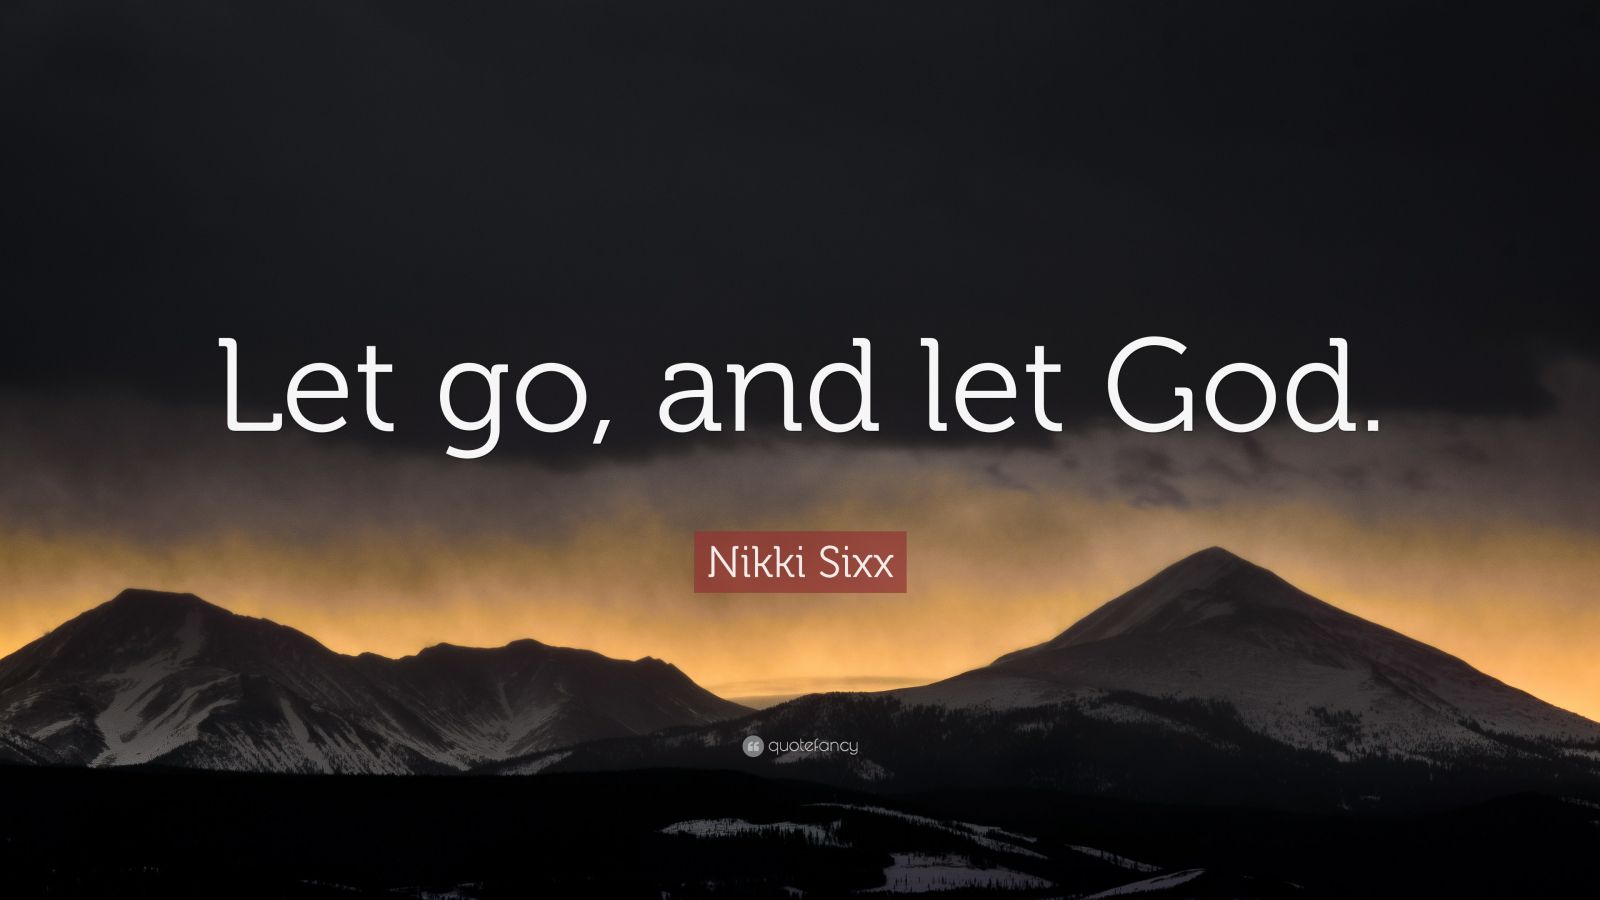 What Does it Mean To Let Go and Let God